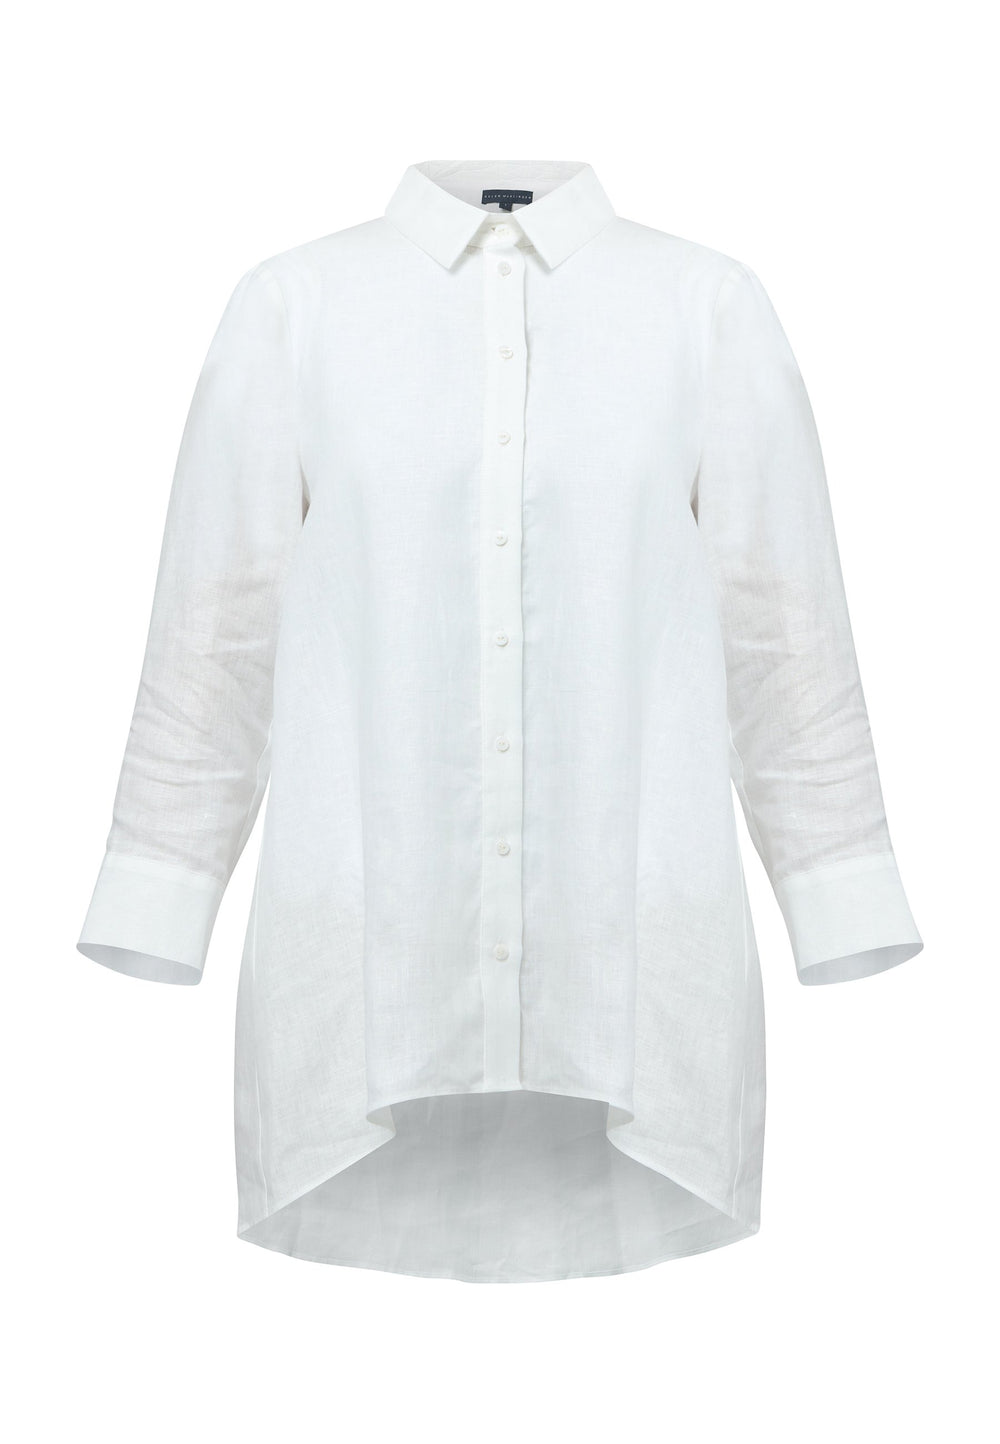 The Beatriz White Linen Shirt is a summer essential, epitomizing timeless elegance. Crafted from the sustainable fabric, Linen, it boasts an easy fit for comfort. The classic shirt collar and covered placket provide a clean, sophisticated touch, while the back yoke with box pleat detailing enhances its refined aesthetic. With versatile bracelet-length sleeves, the Beatriz shirt is a must-have staple for your summer wardrobe, offering both style and comfort in warm weather.